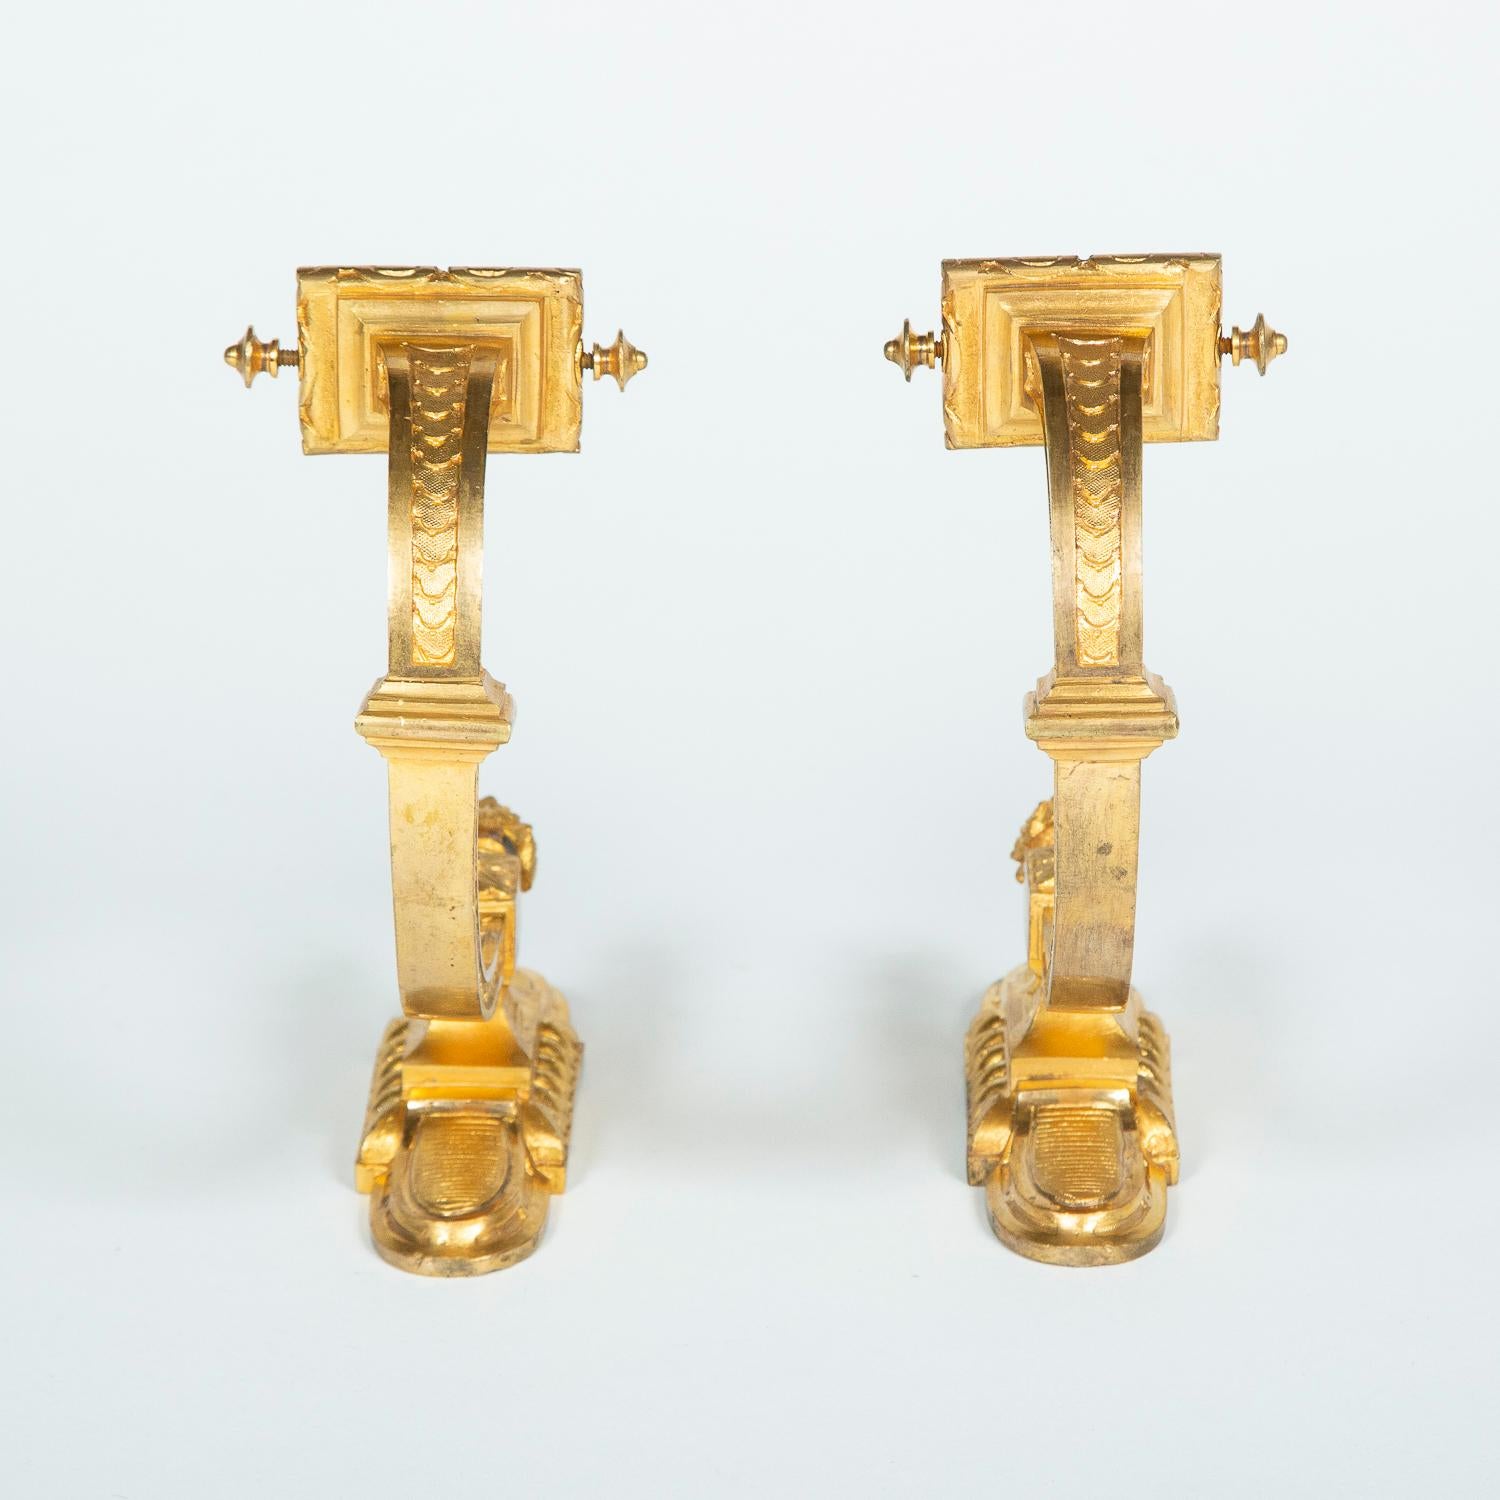 French Pair of Gilt Bronze Curtain Tie Backs